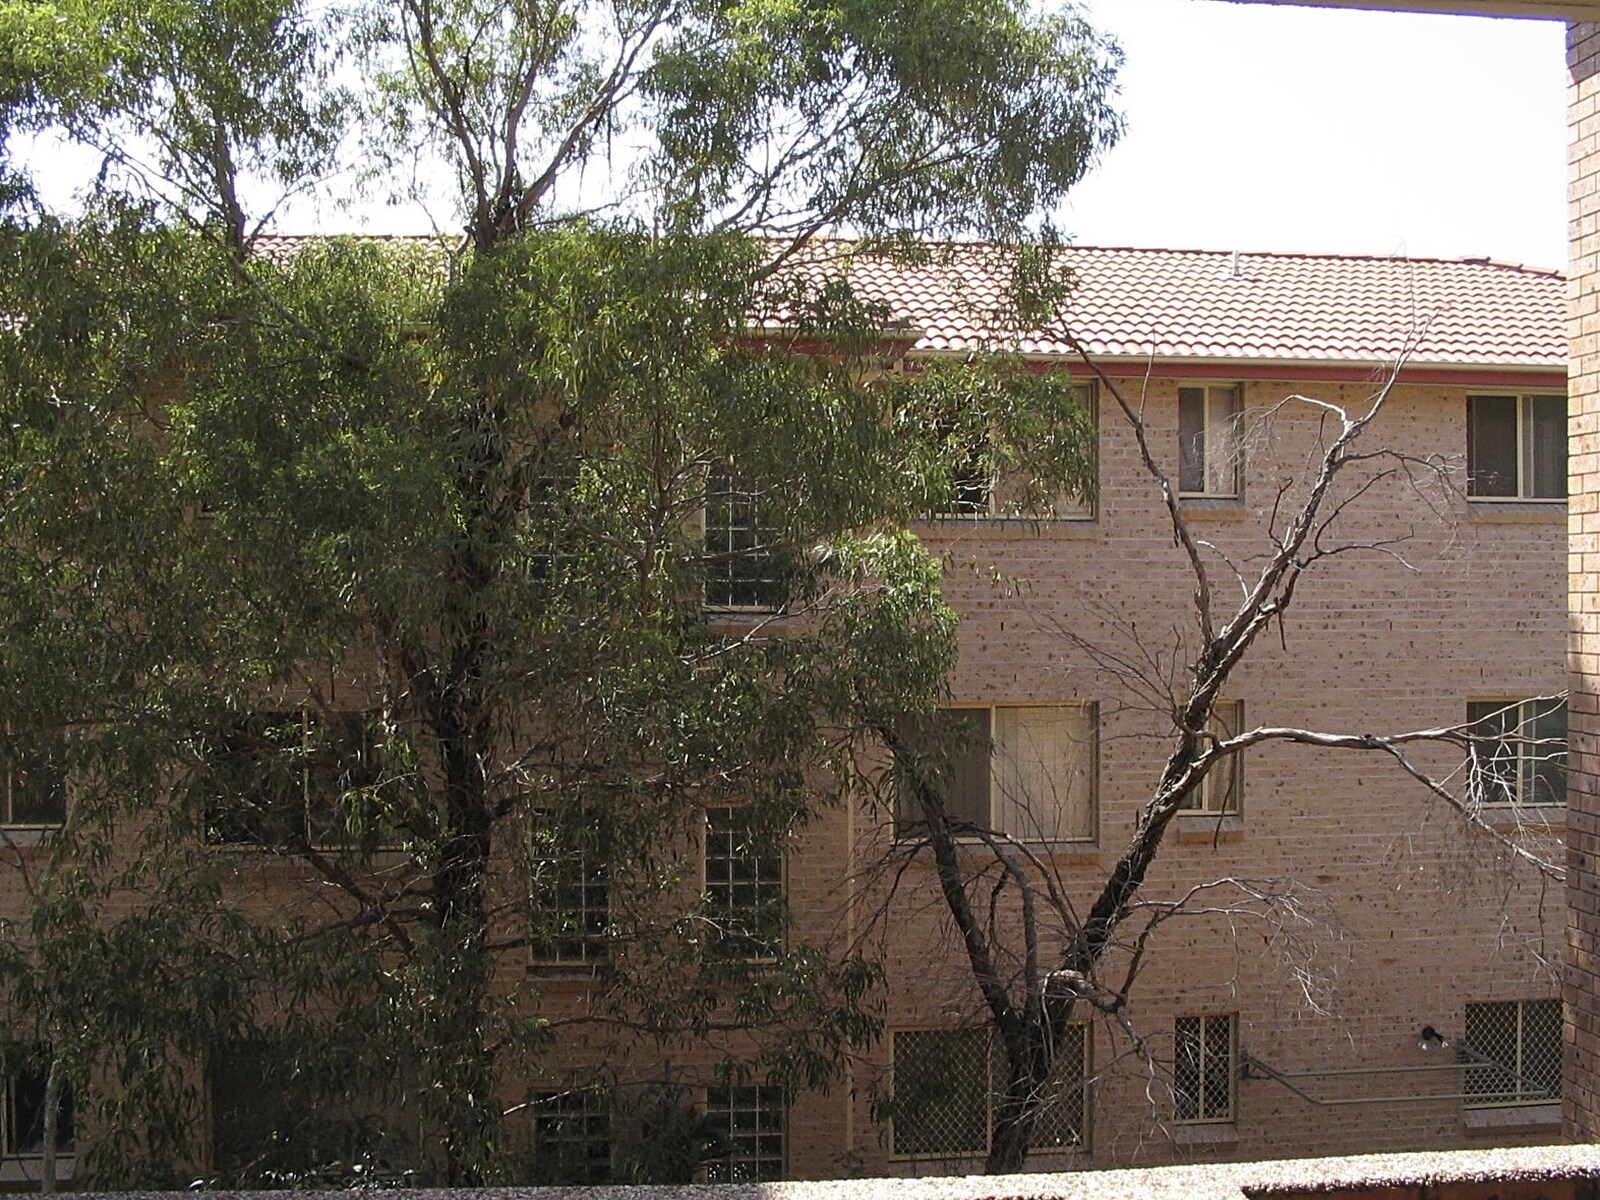 The view from Dave's flat in Parramatta from Sydney, New South Wales, Australia - 10th October 2004